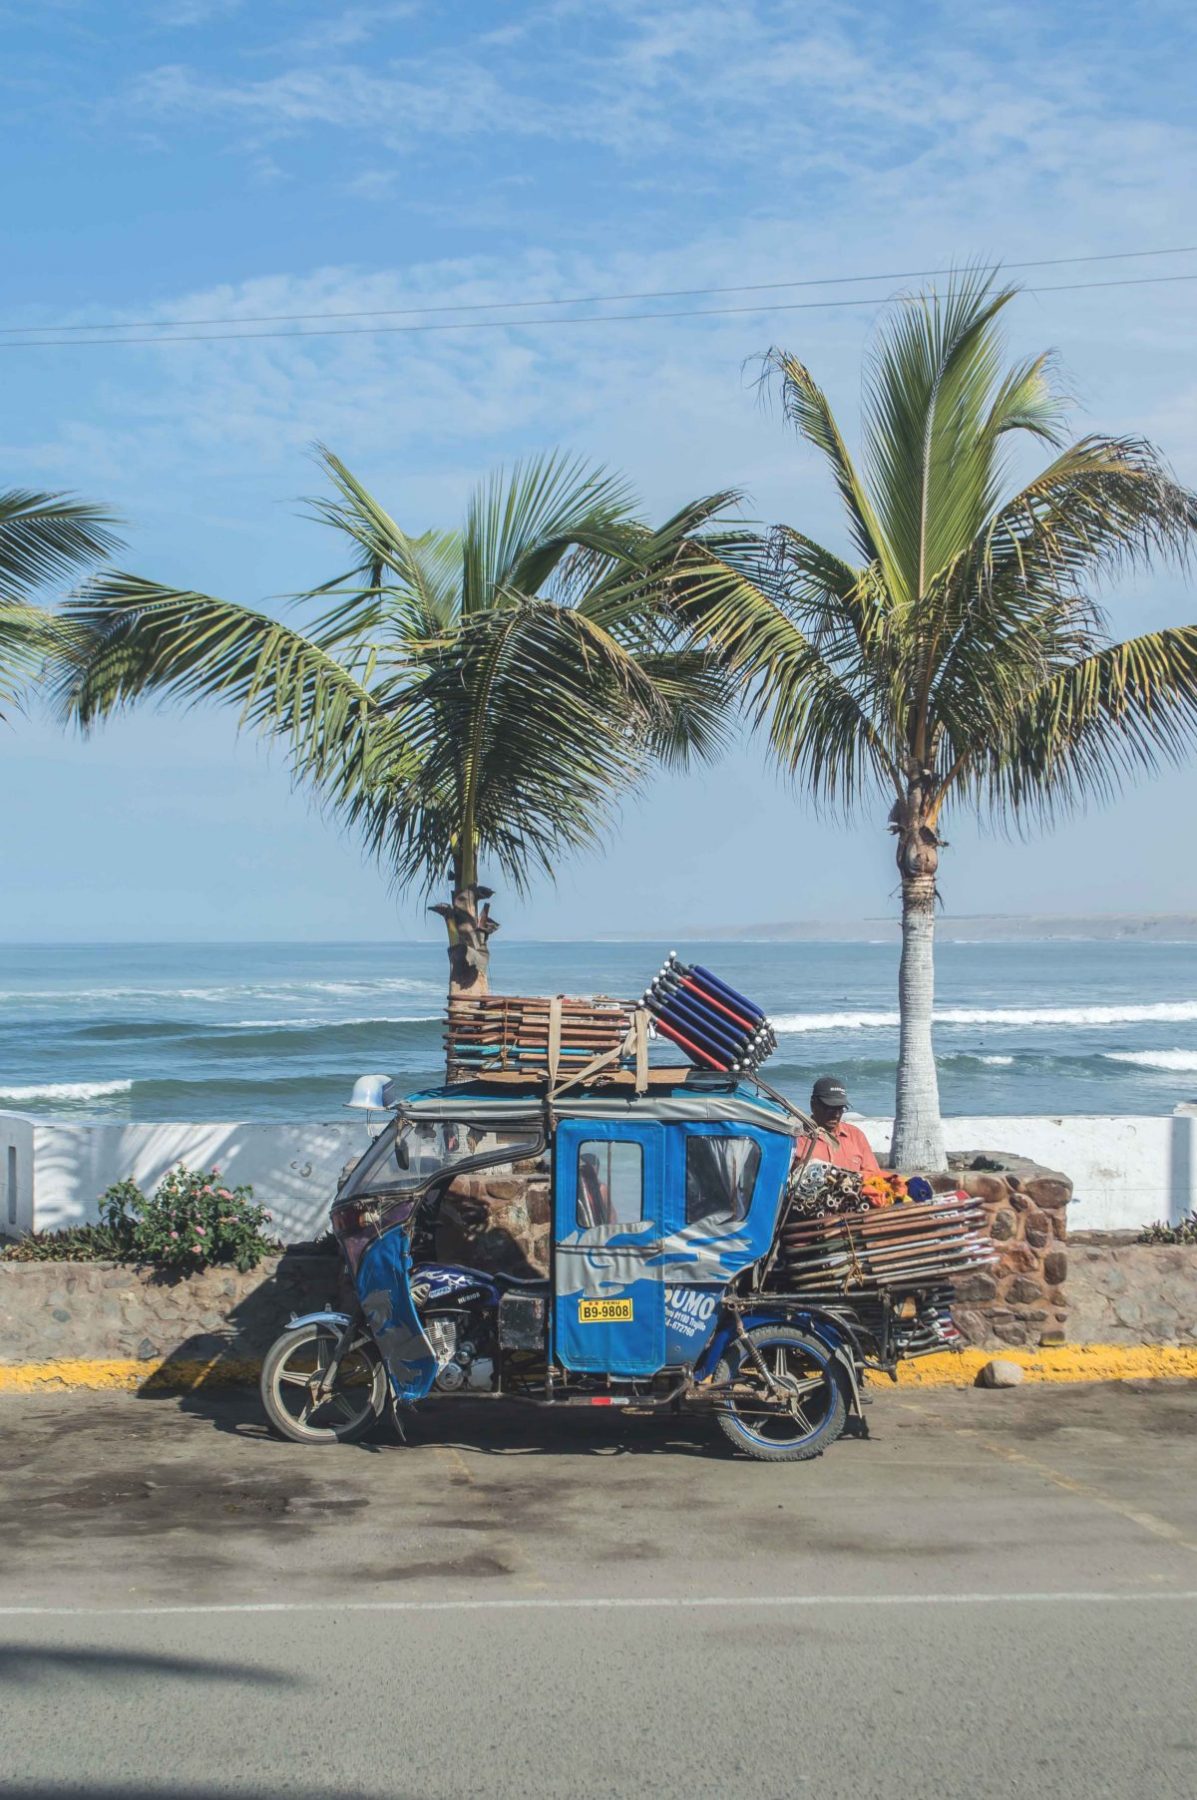 Your Food and Adventure Guide to Huanchaco, Peru